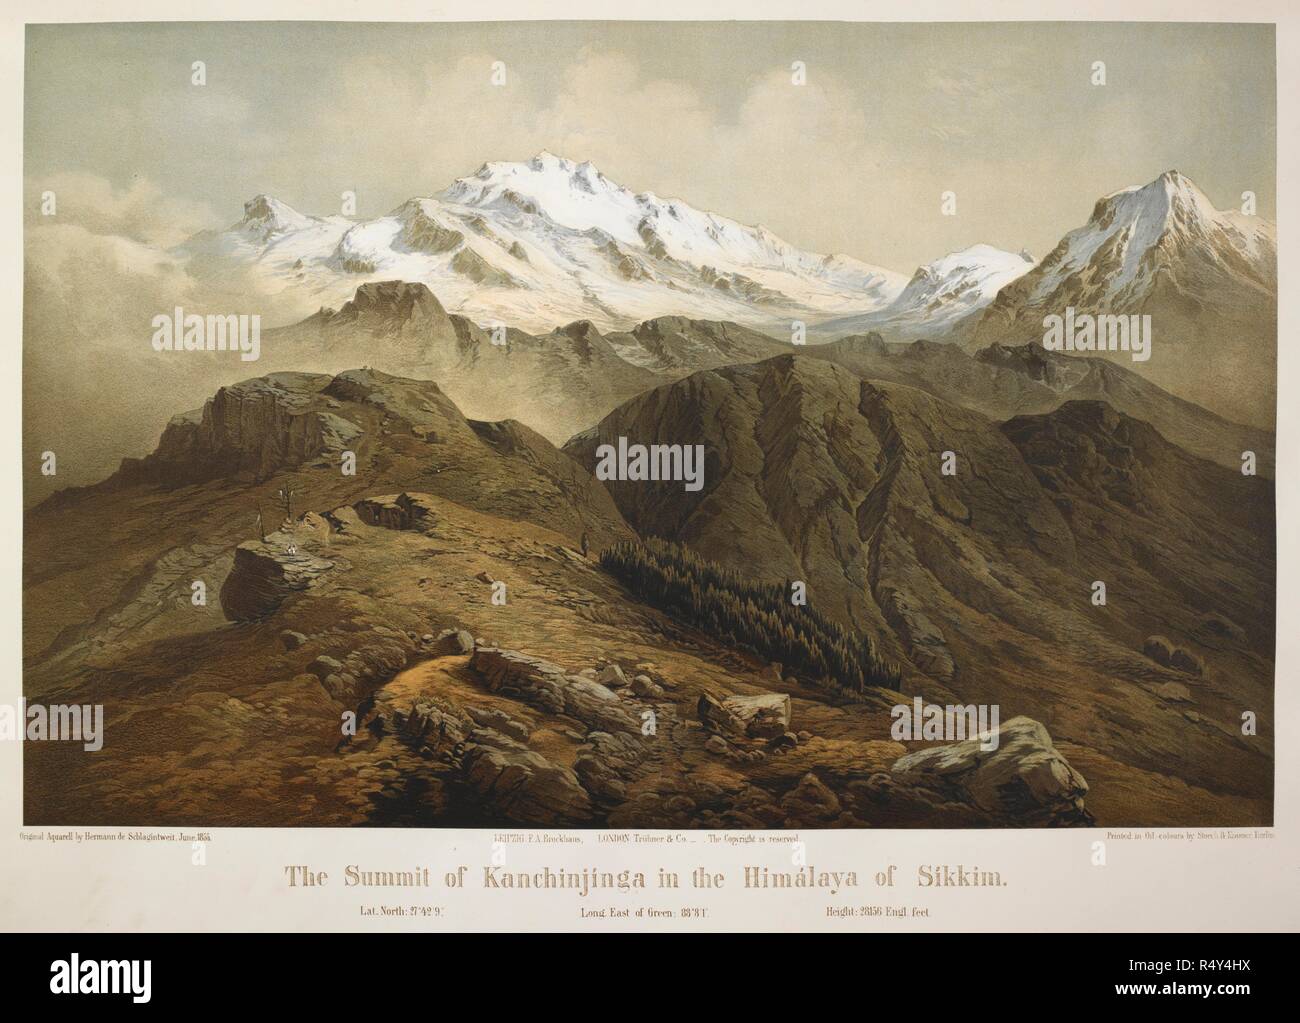 The summit of Kanchinjinga in the Himalaya of the Sikkim. . Results of a Scientific Mission to India and High Asia, undertaken between the years 1854 and 1858, by order of the Court of Directors of the Honourable East India Company, by H., A. and R. de Schlagintweit. 1855. Printed in oil colours. One of the highest Moutains in the world. Source: 1899.a.8 part 1, plate 2. Language: English. Author: Schhlagintweit, Hermann de. Stock Photo